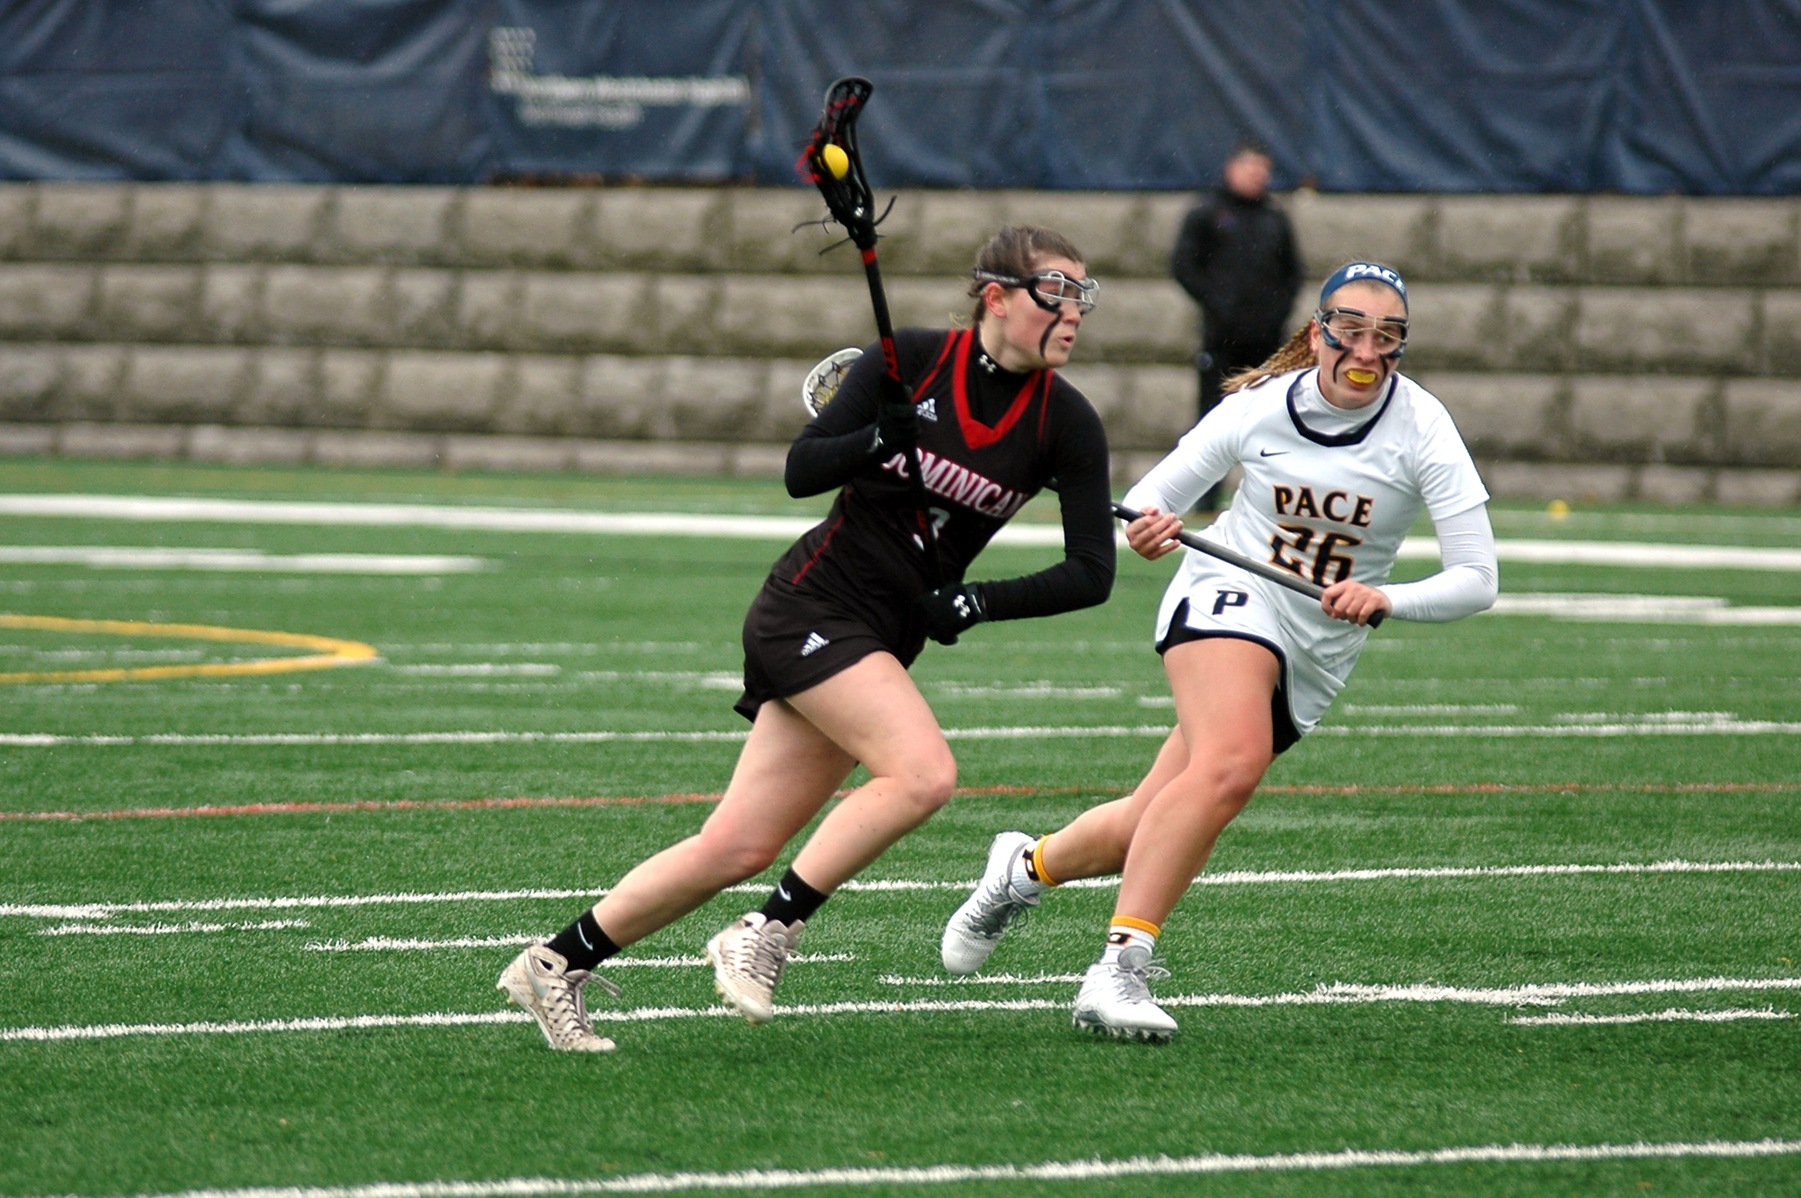 FOX RECORDS CAREER HIGH SIX GOALS IN VICTORY OVER PURPLE KNIGHTS